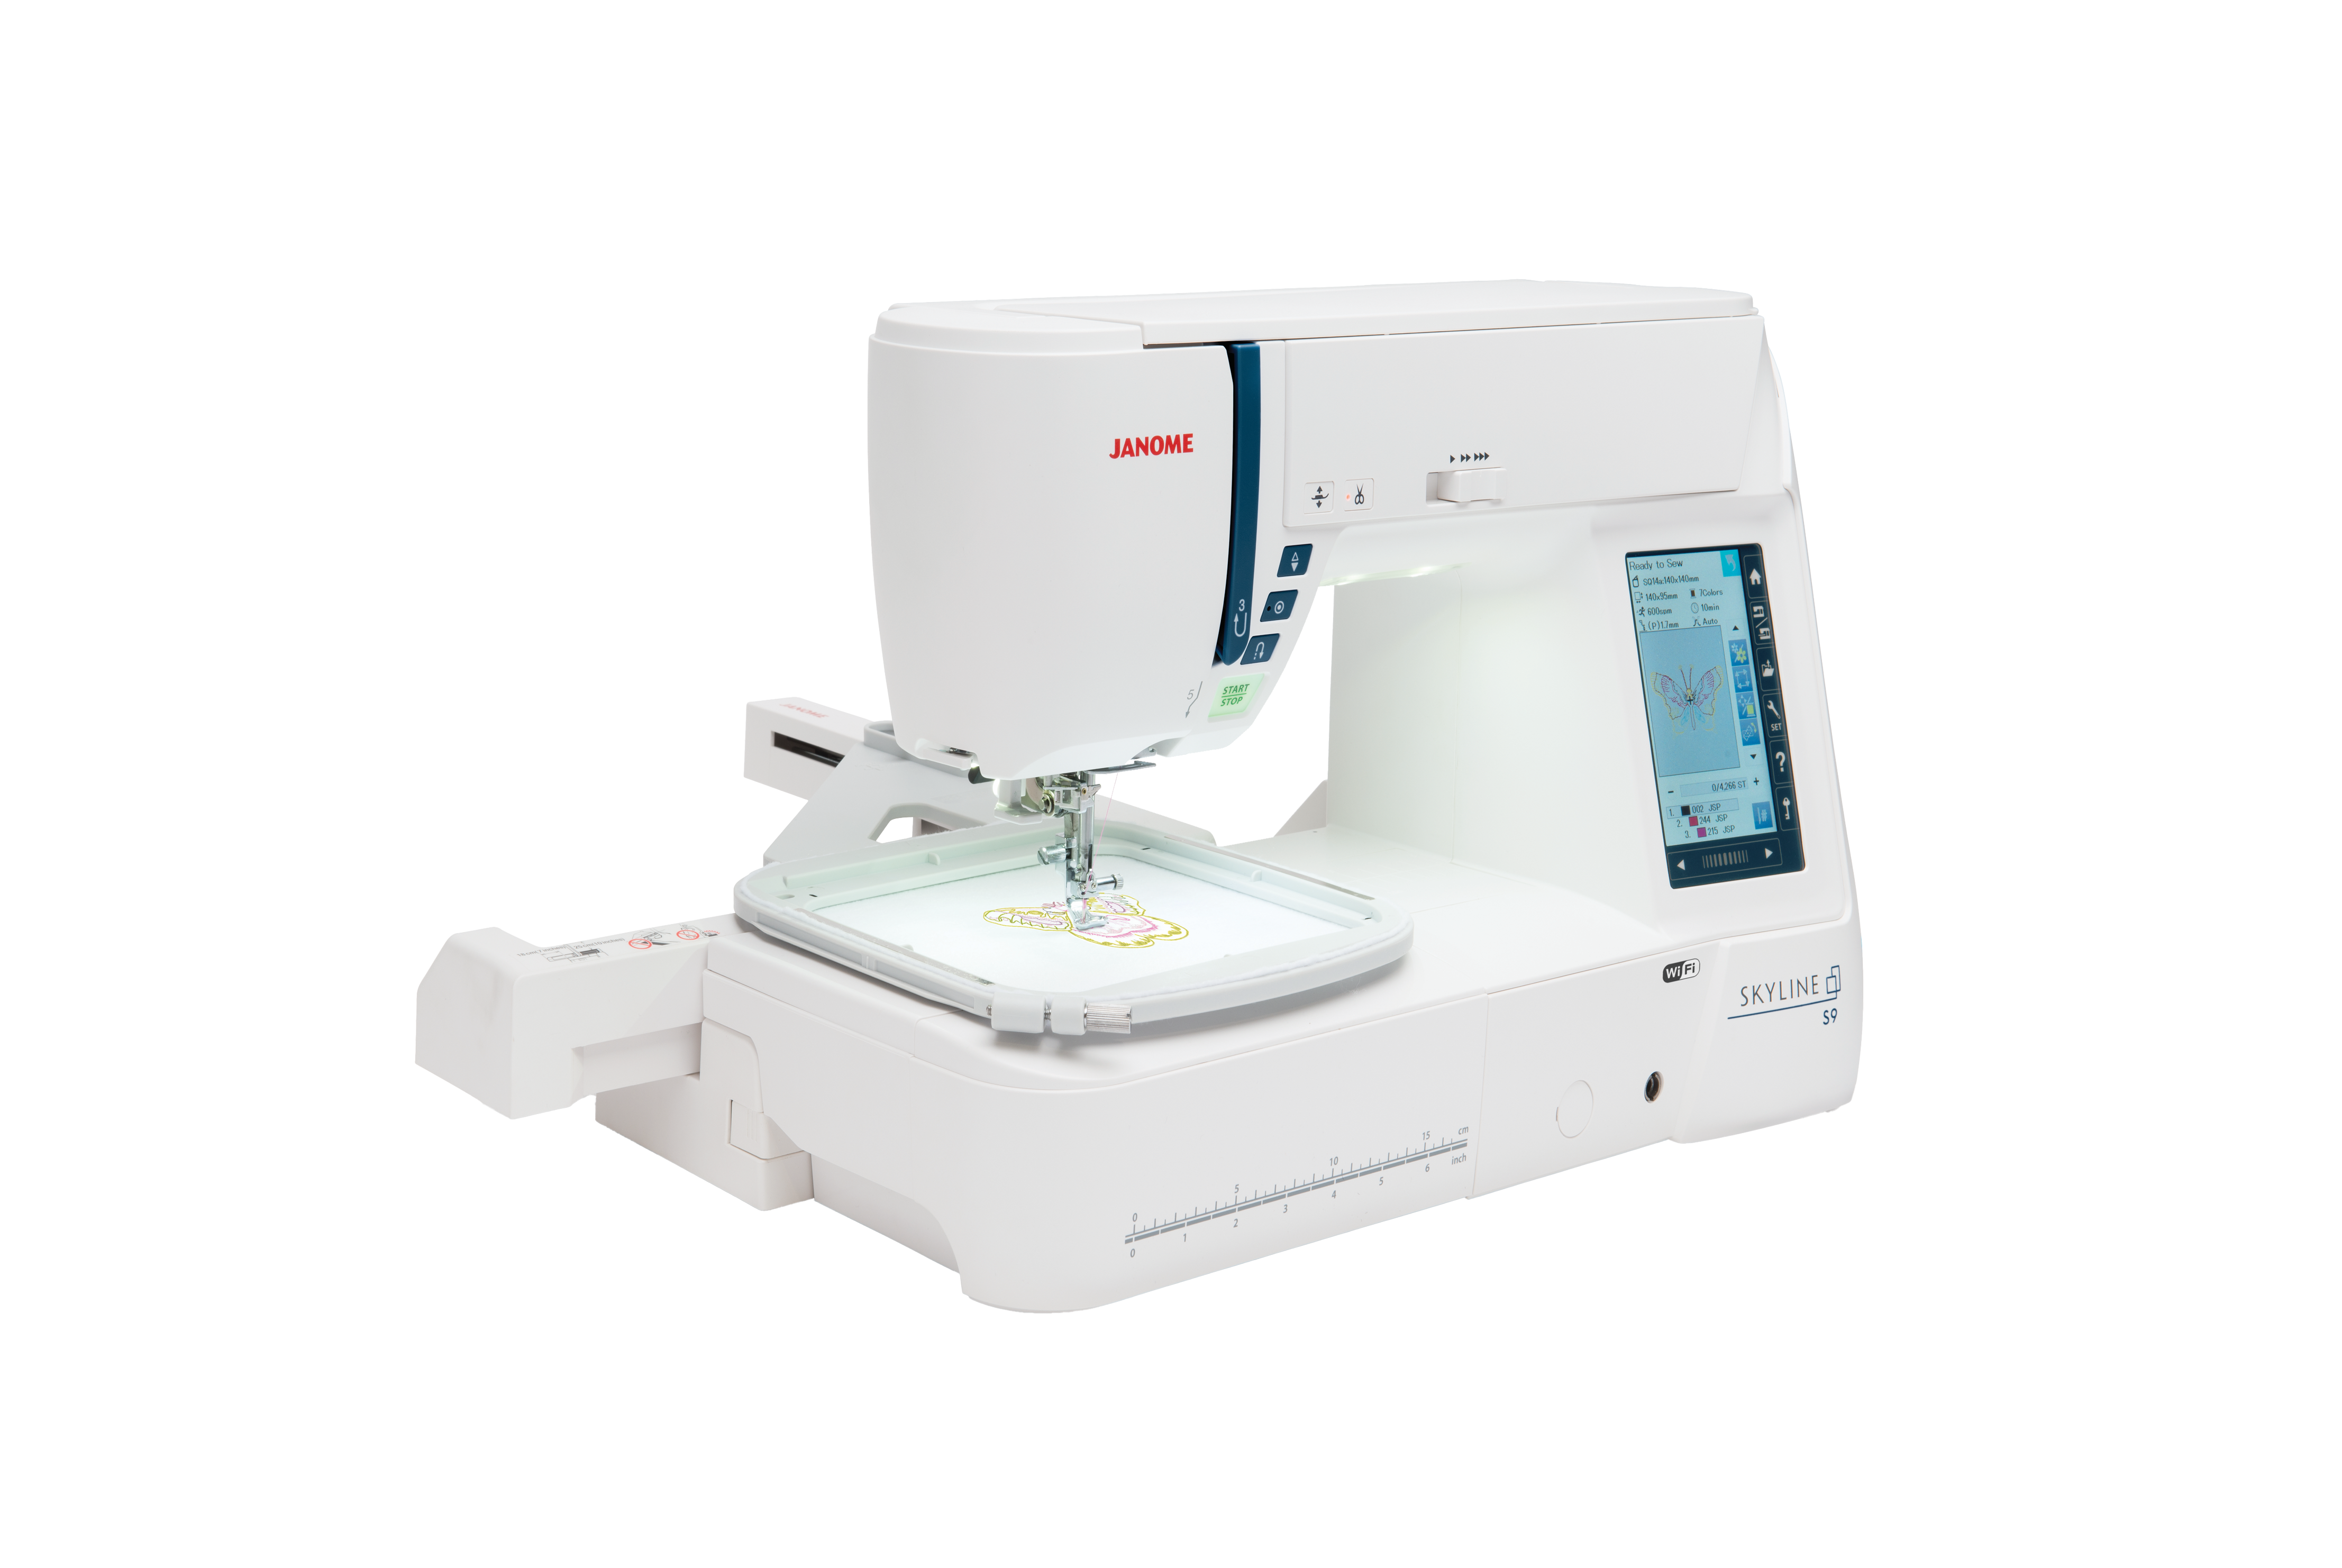 Janome Skyline S9 Sewing Quilting and Embroidery Machine